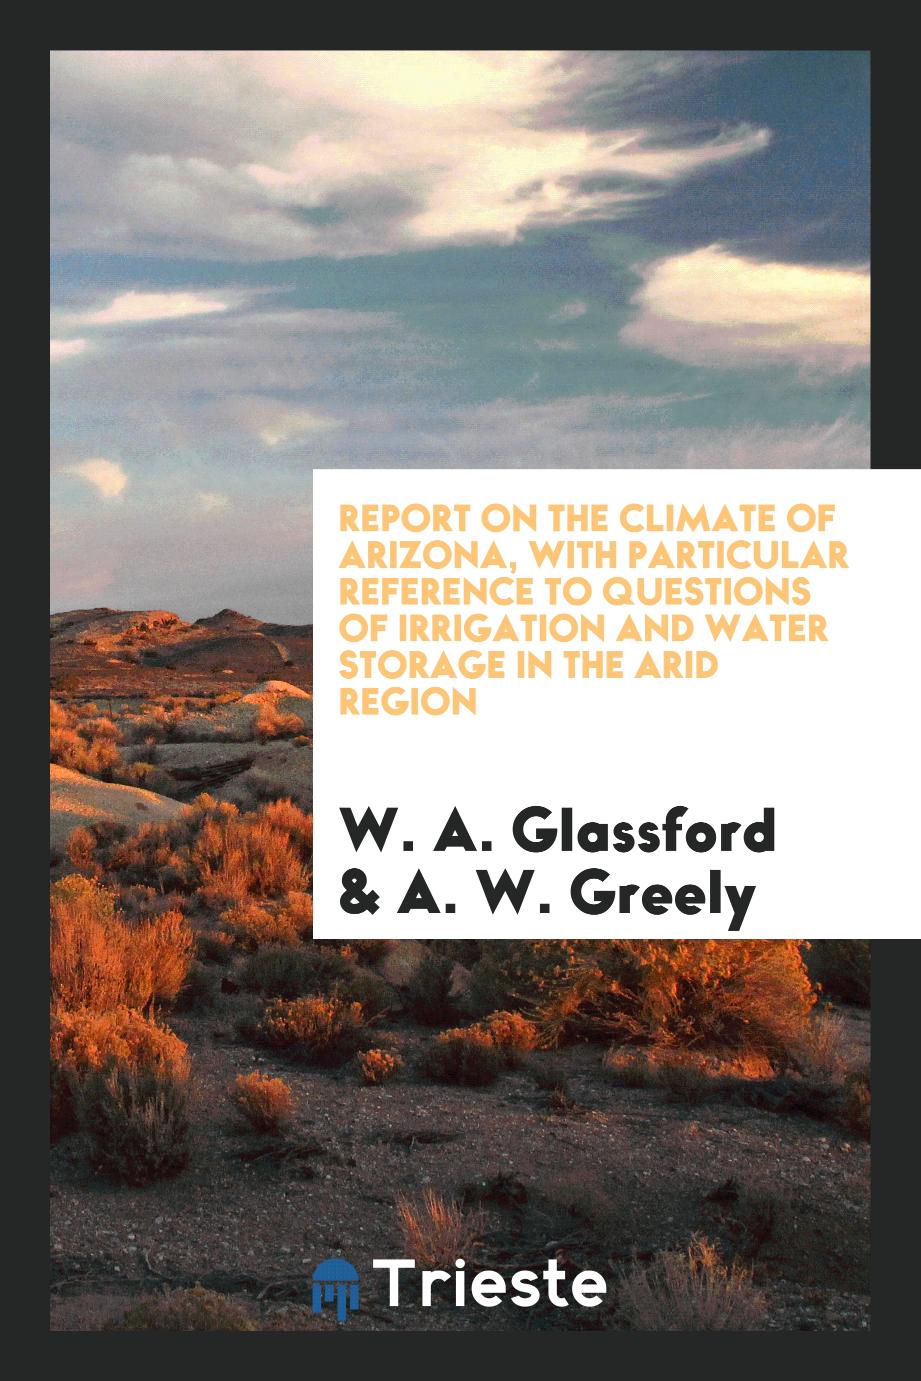 Report on the Climate of Arizona, with Particular Reference to Questions of Irrigation and Water Storage in the Arid Region